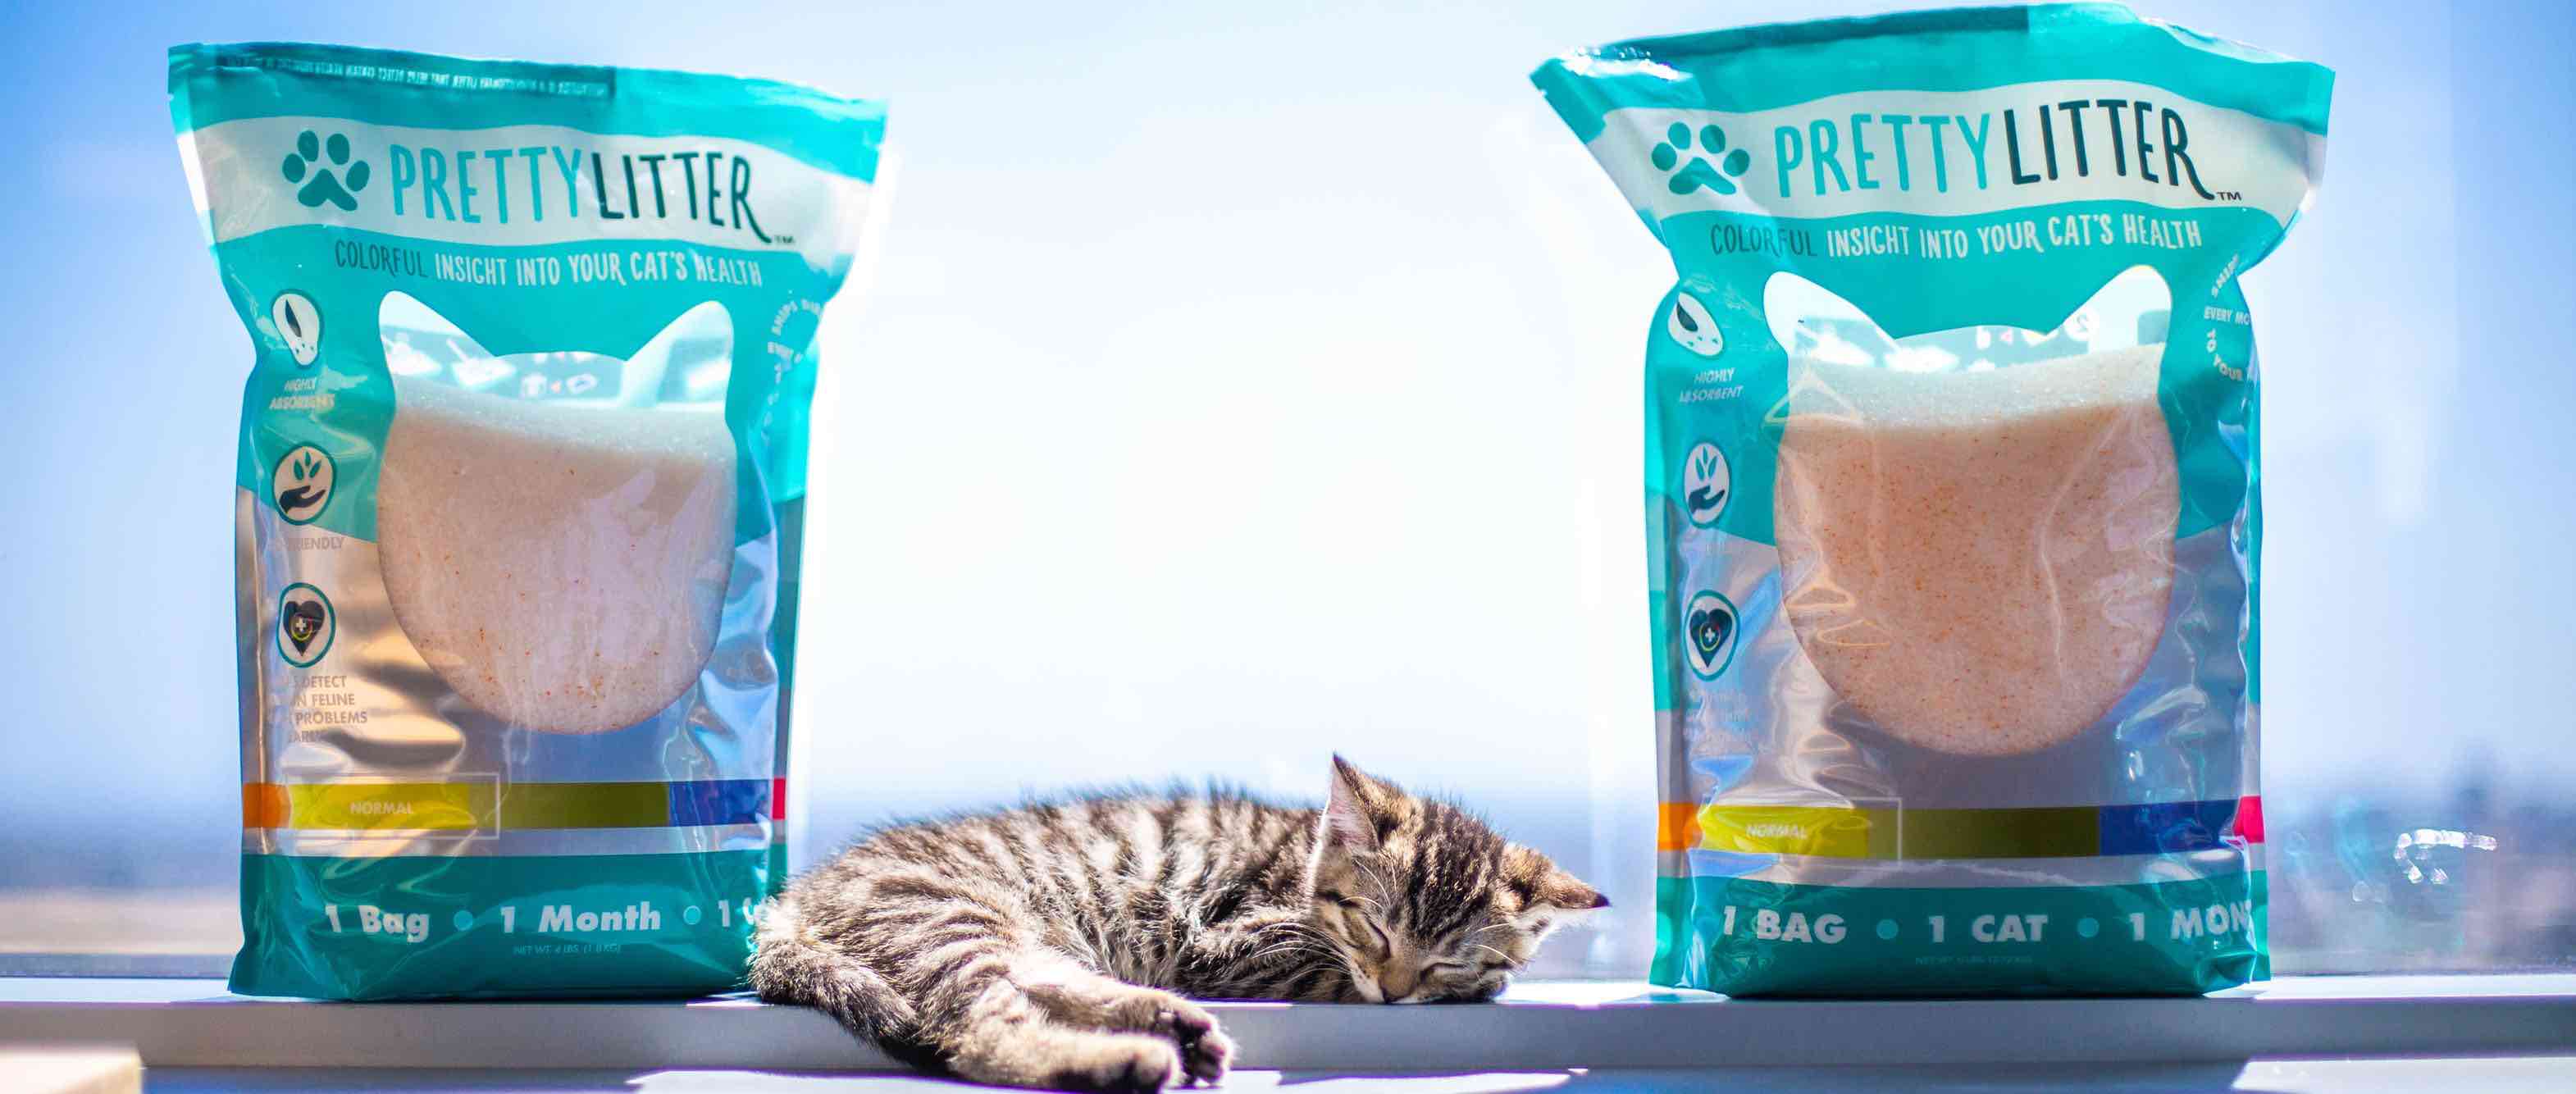 Does PrettyLitter Work? HealthMonitoring Cat Litter Review